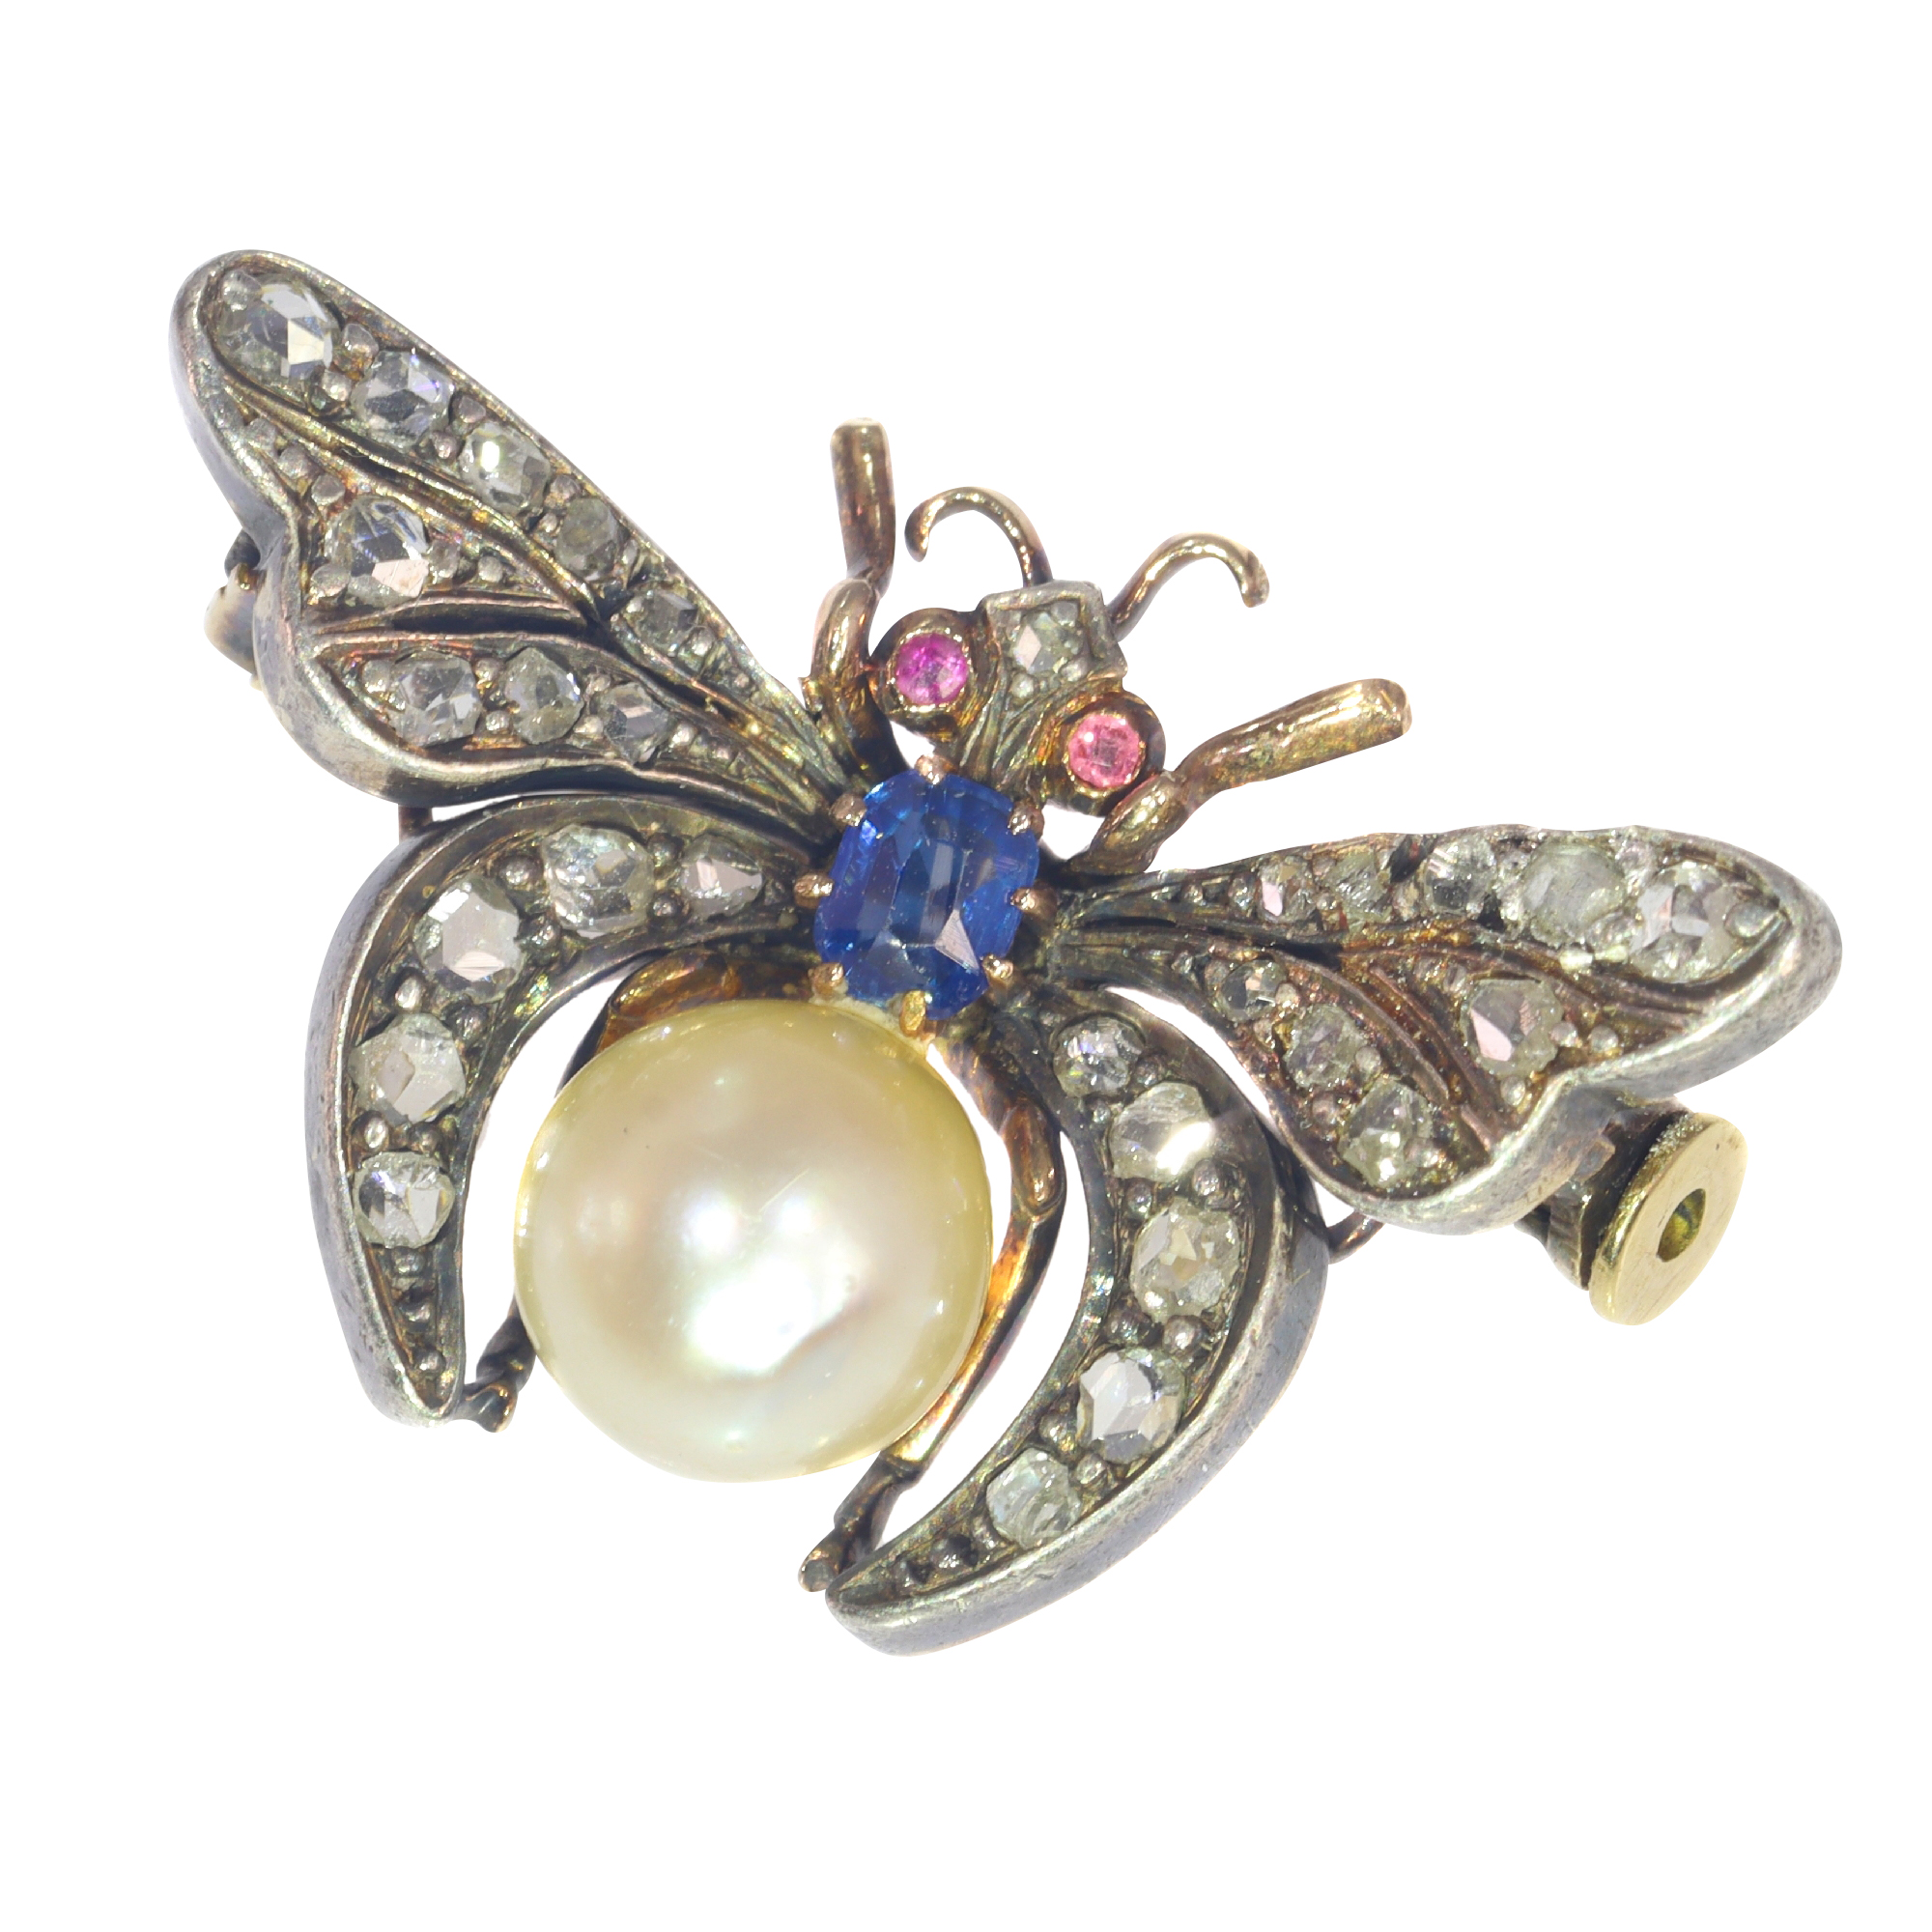 Vintage antique diamond and pearl insect brooch